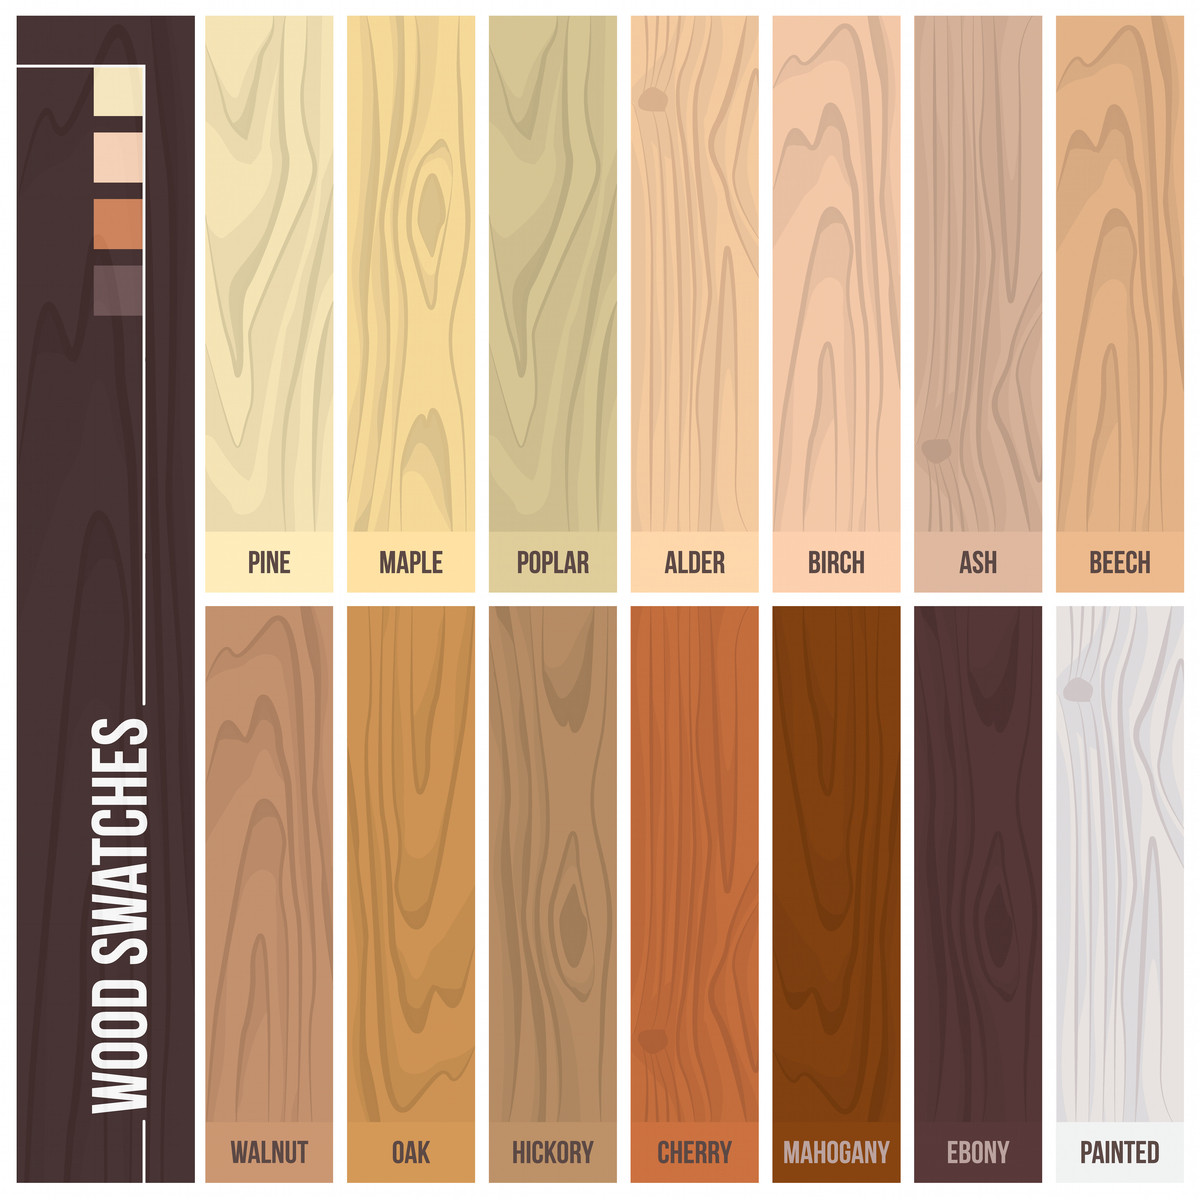 24 Recommended 5 16 solid Hardwood Flooring 2022 free download 5 16 solid hardwood flooring of 12 types of hardwood flooring species styles edging dimensions for types of hardwood flooring illustrated guide